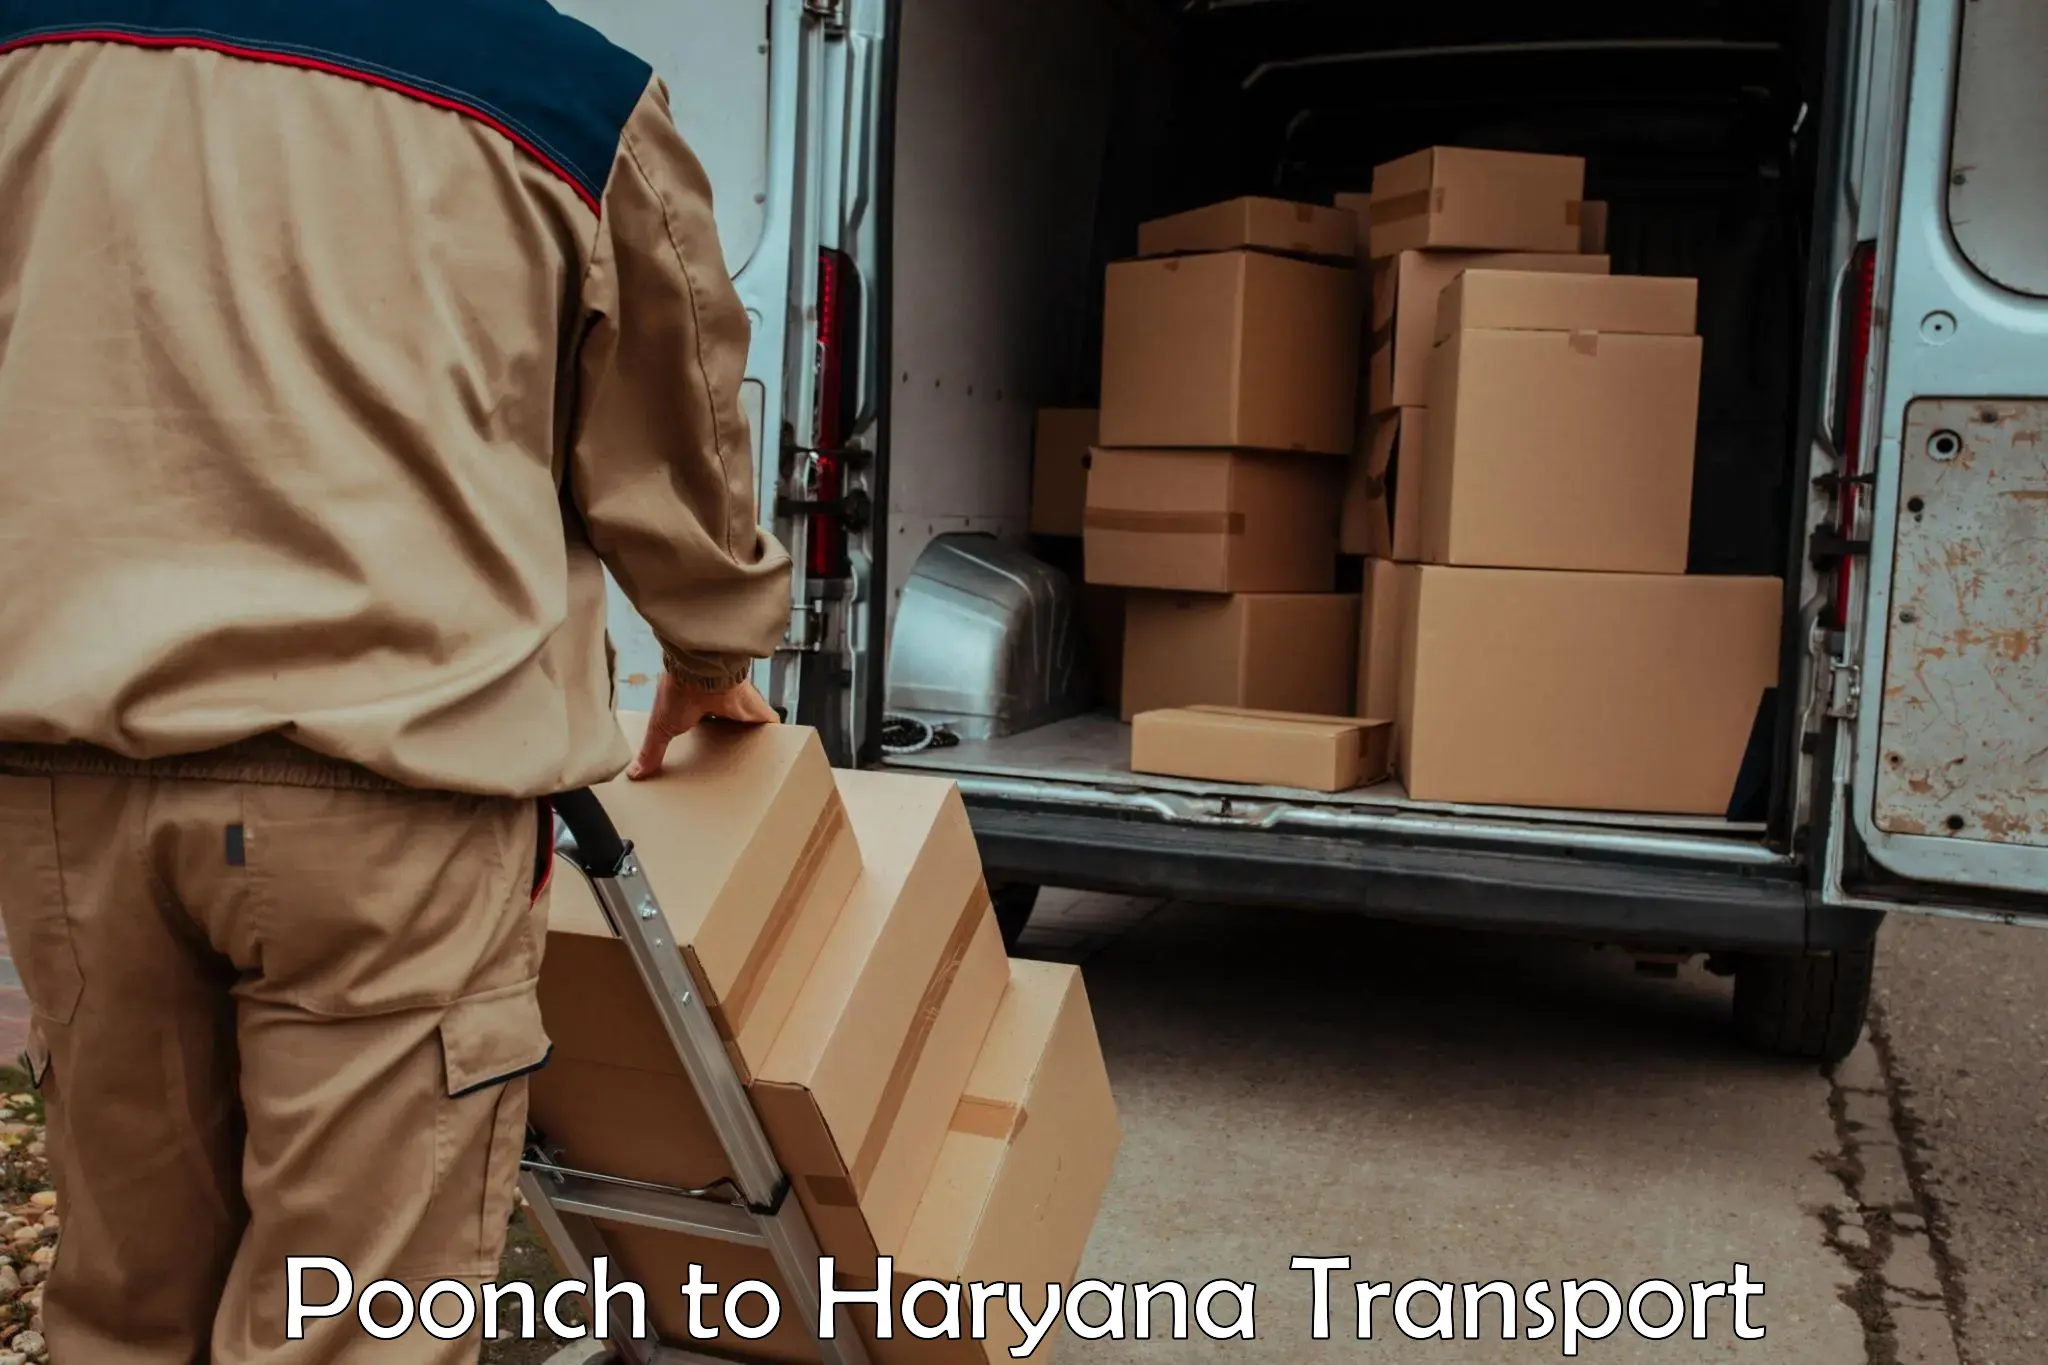 Delivery service Poonch to Haryana